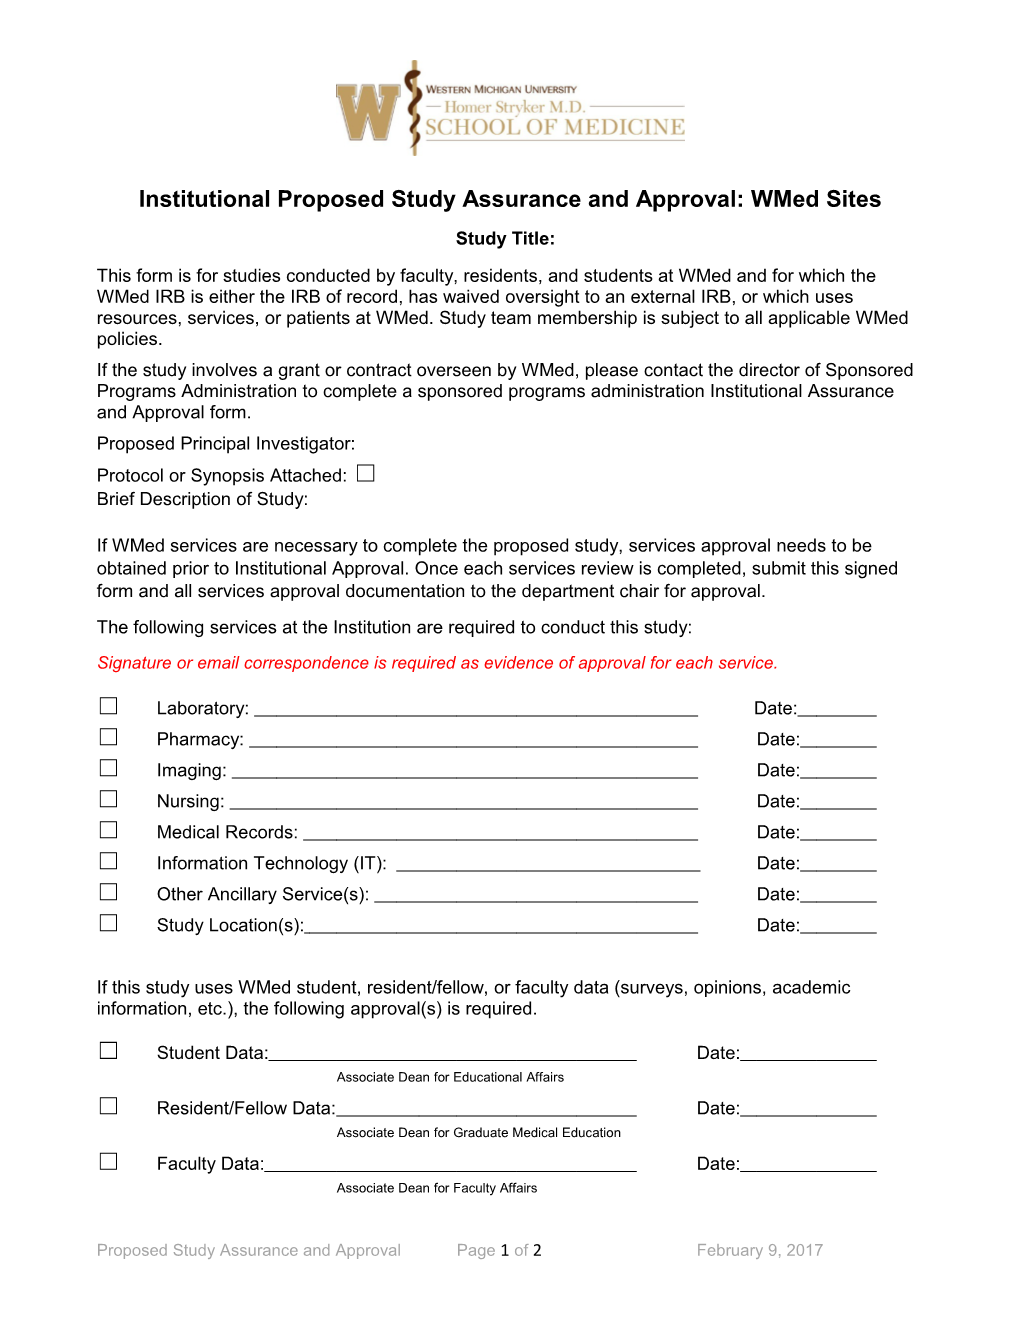 Institutional Proposed Study Assurance and Approval: Wmed Sites